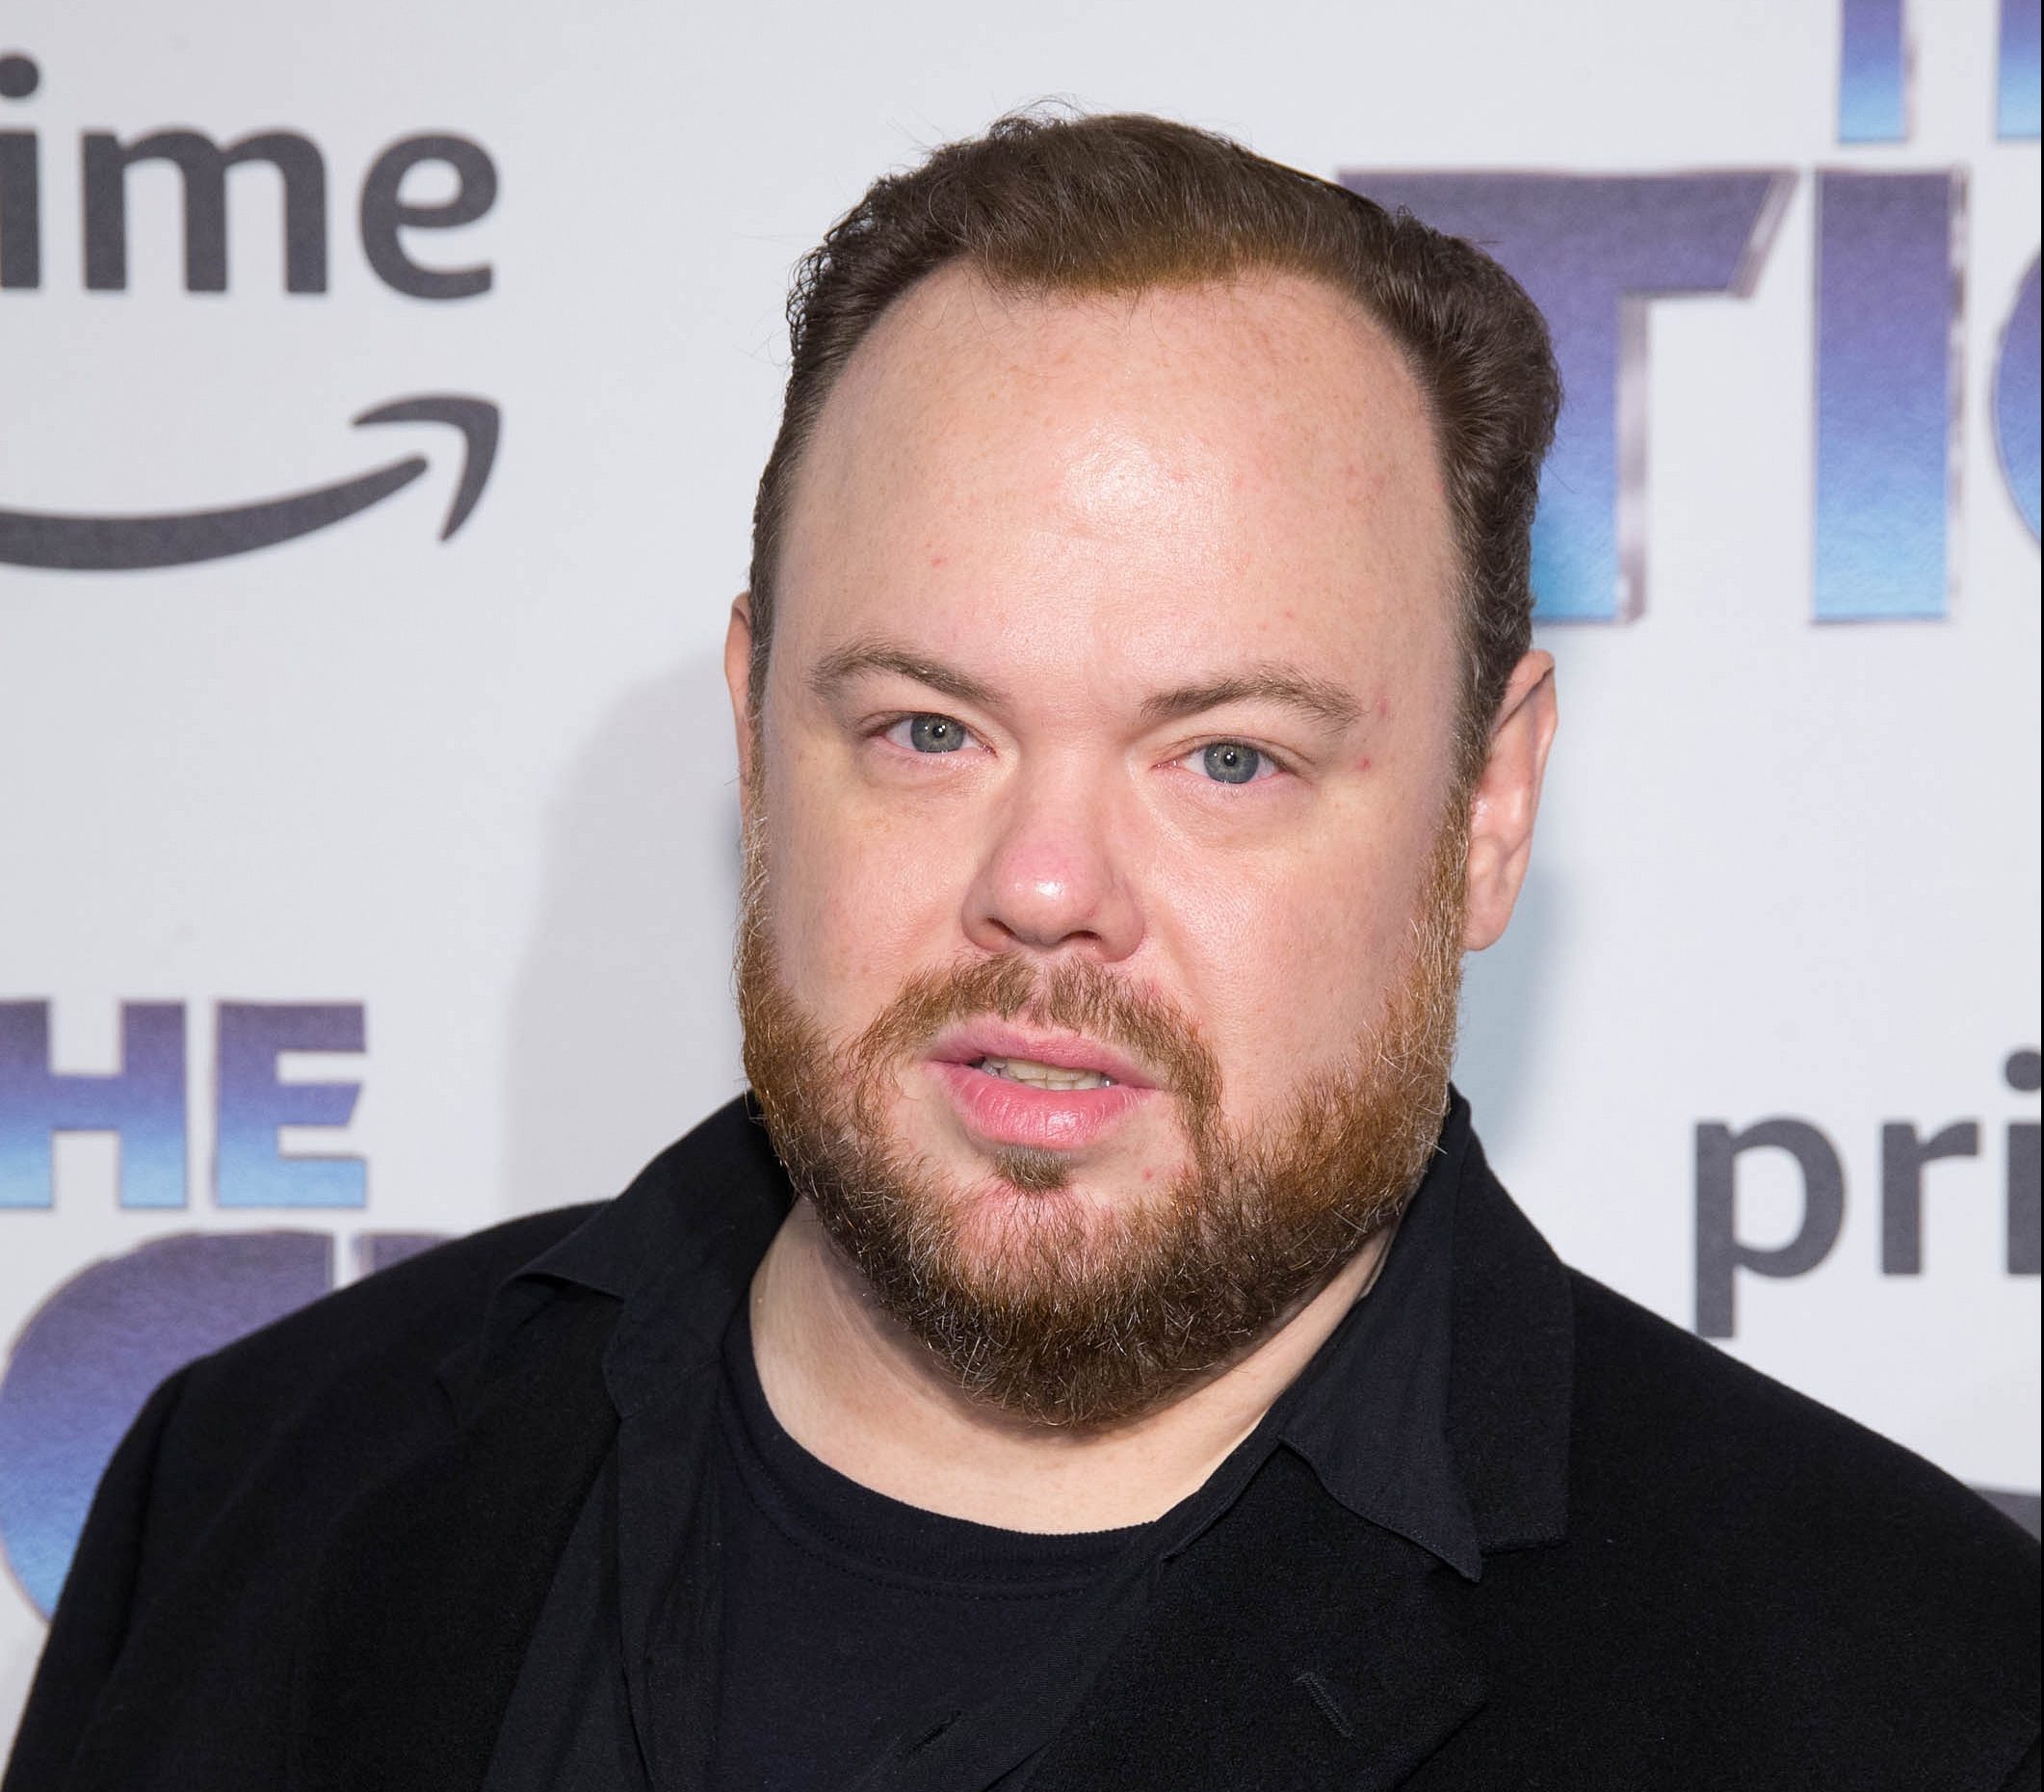 ‘Home Alone’ actor who played Buzz arrested for domestic assault